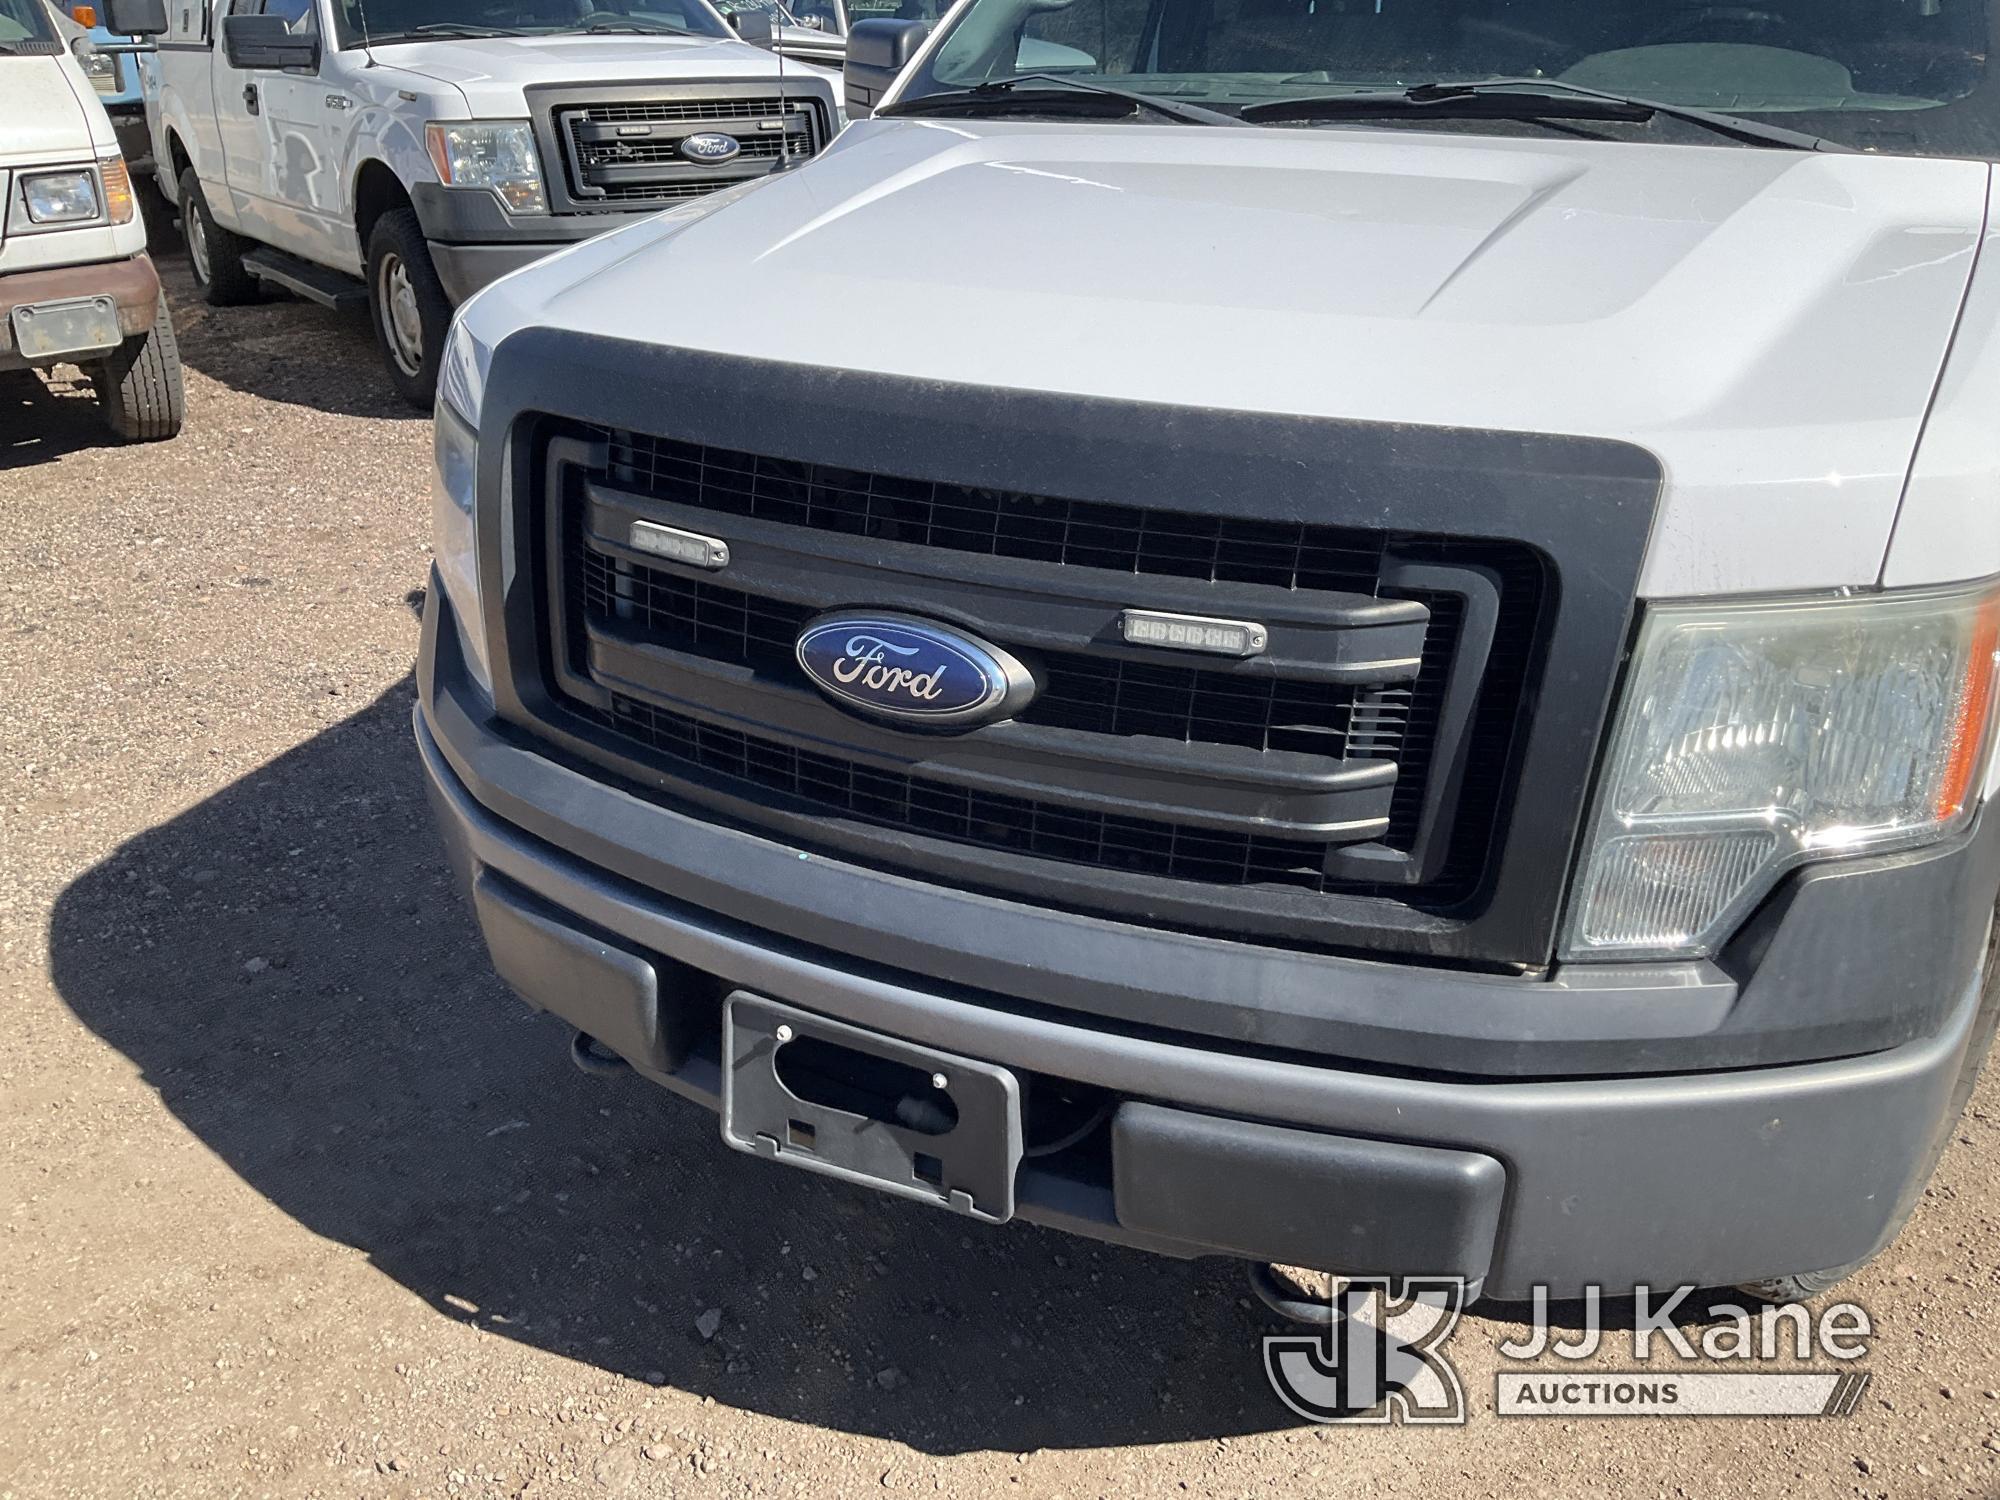 (Castle Rock, CO) 2014 Ford F150 4x4 Extended-Cab Pickup Truck Runs & Moves